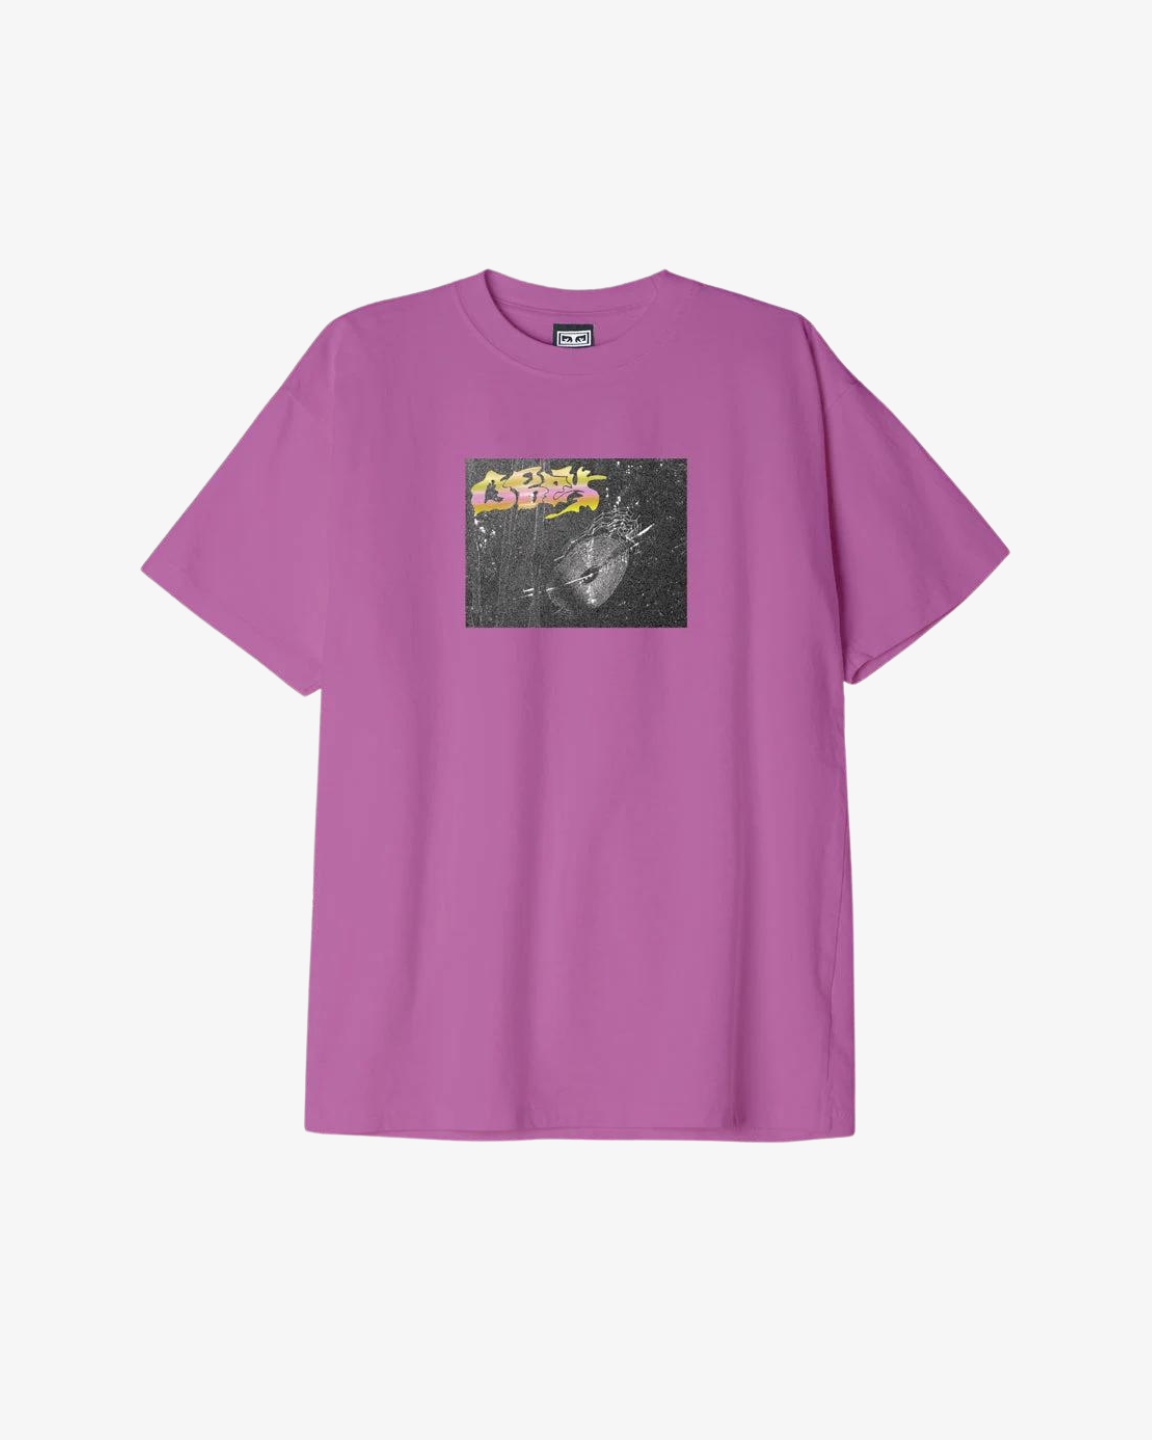 Purple Supreme Clothing for Women